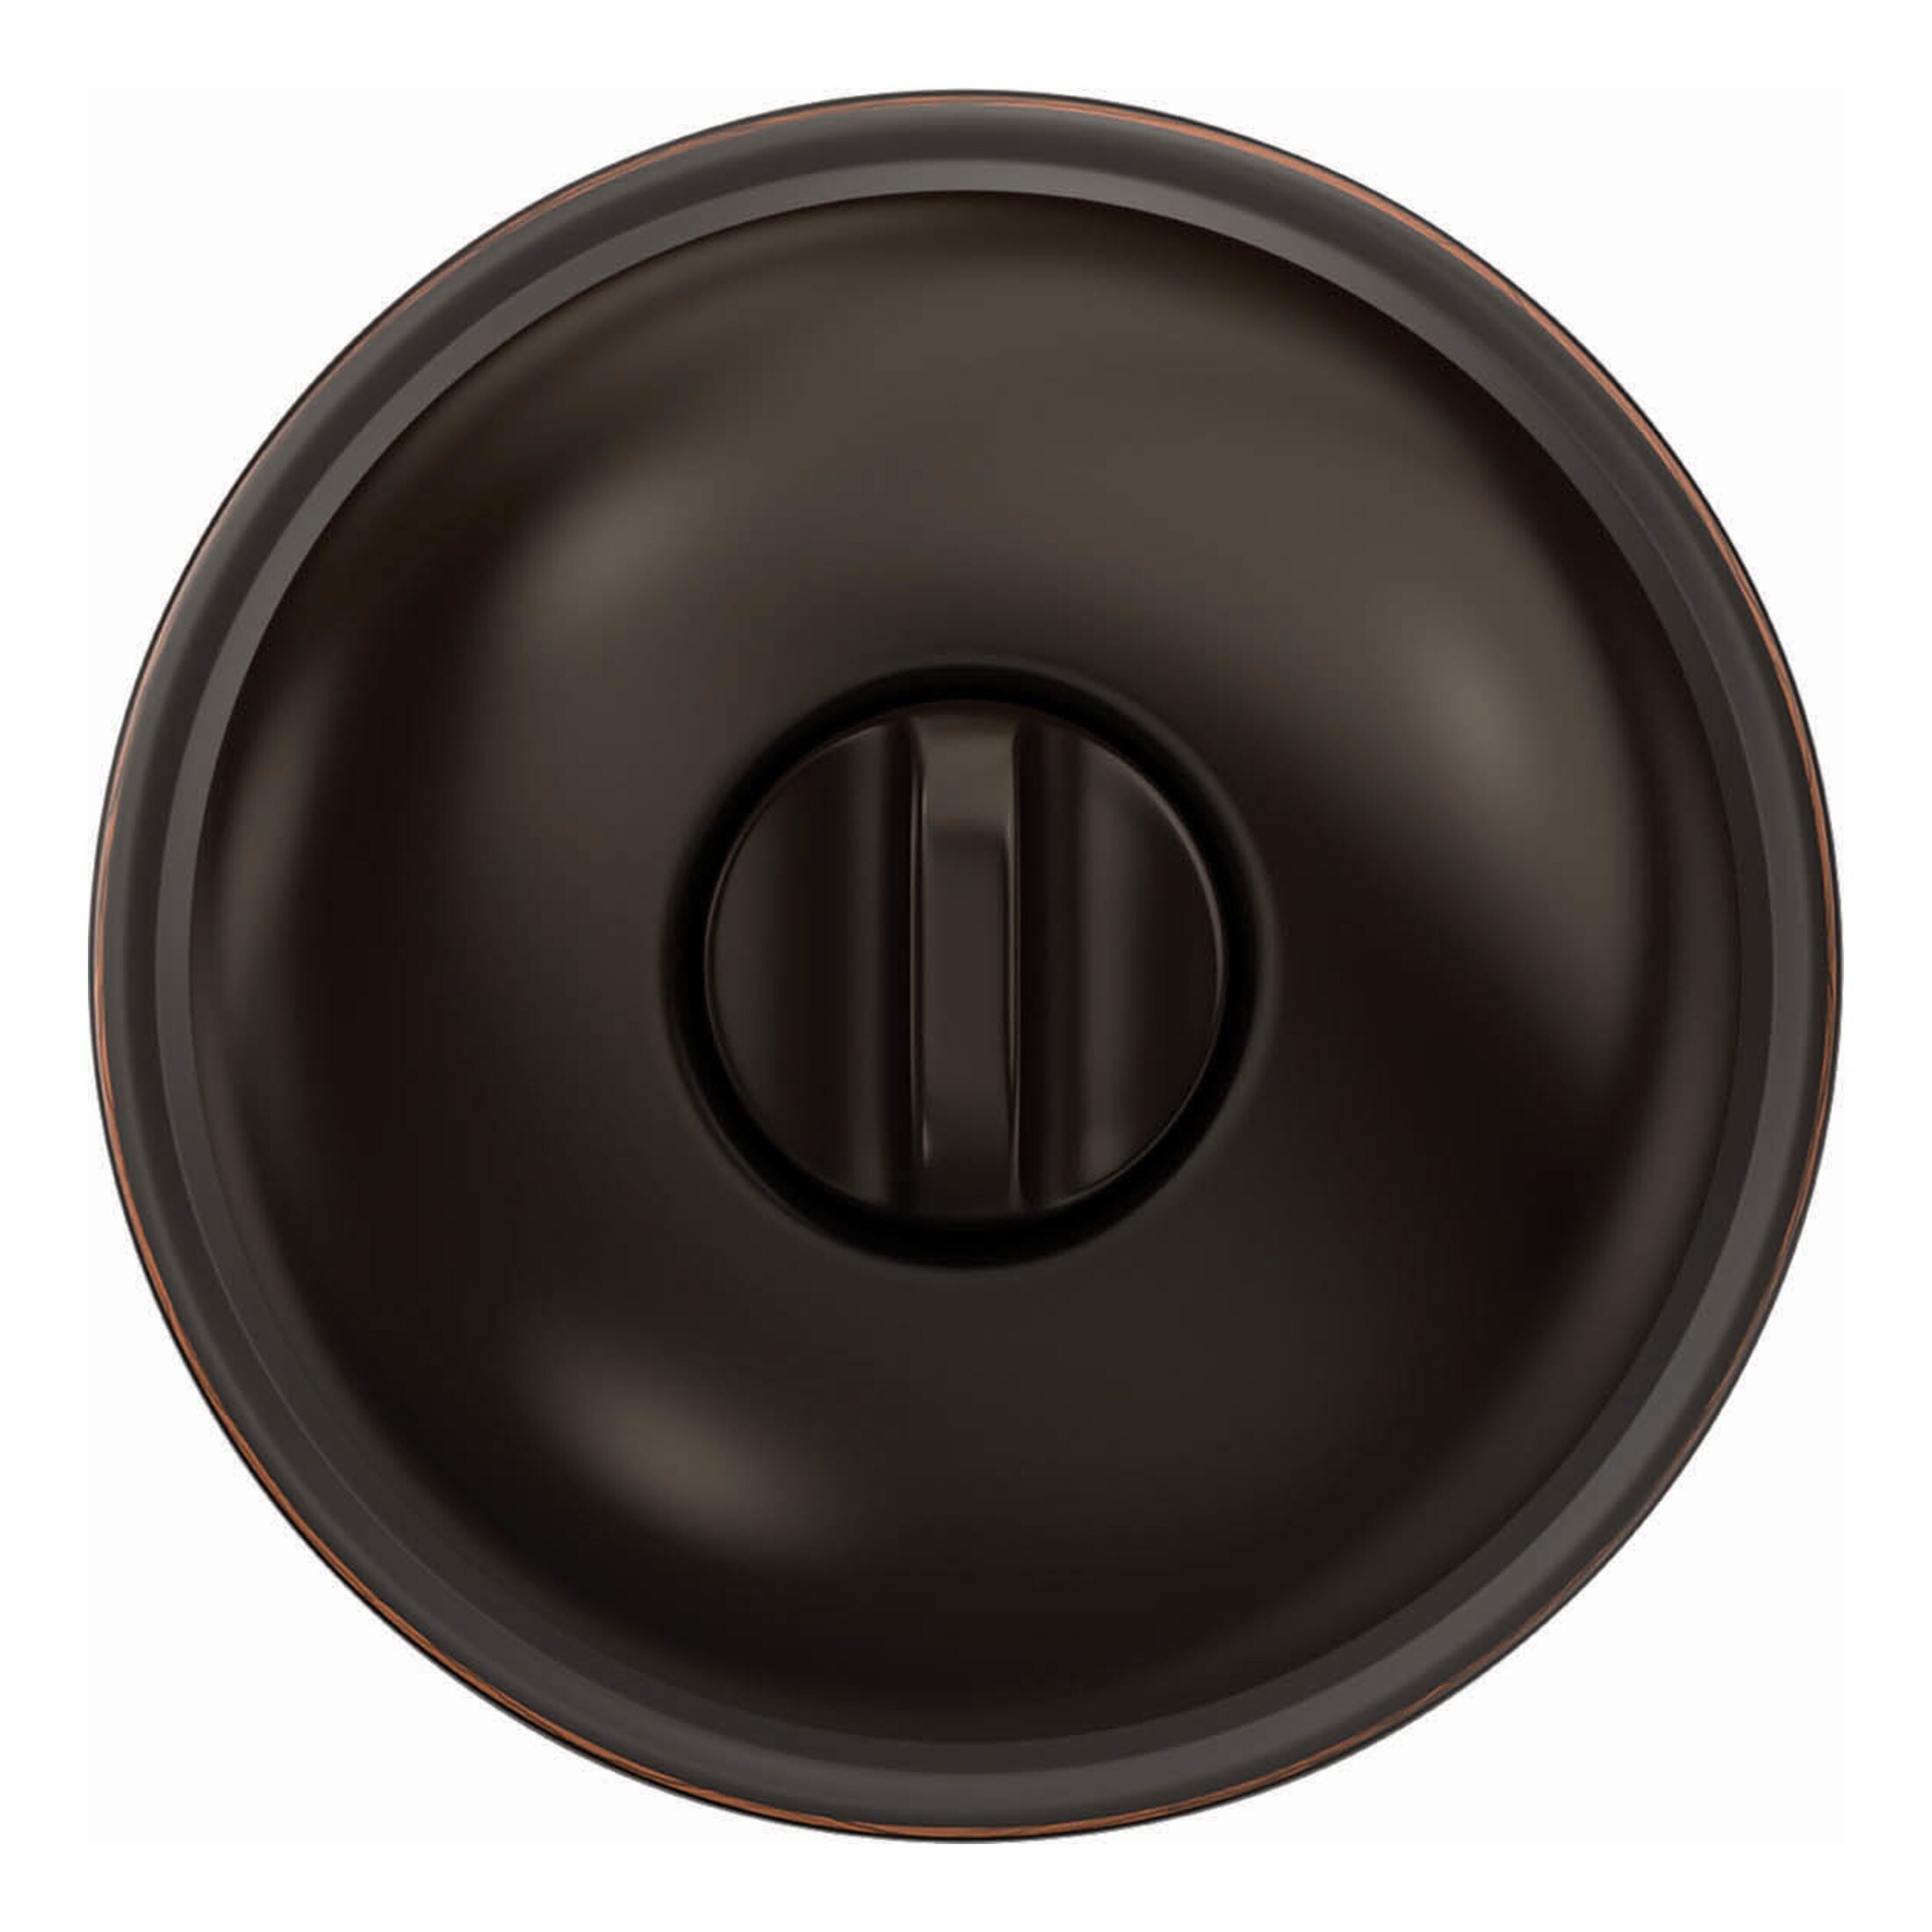 Dexter J40-STR Privacy Knobset from The Stratus Series, Polished